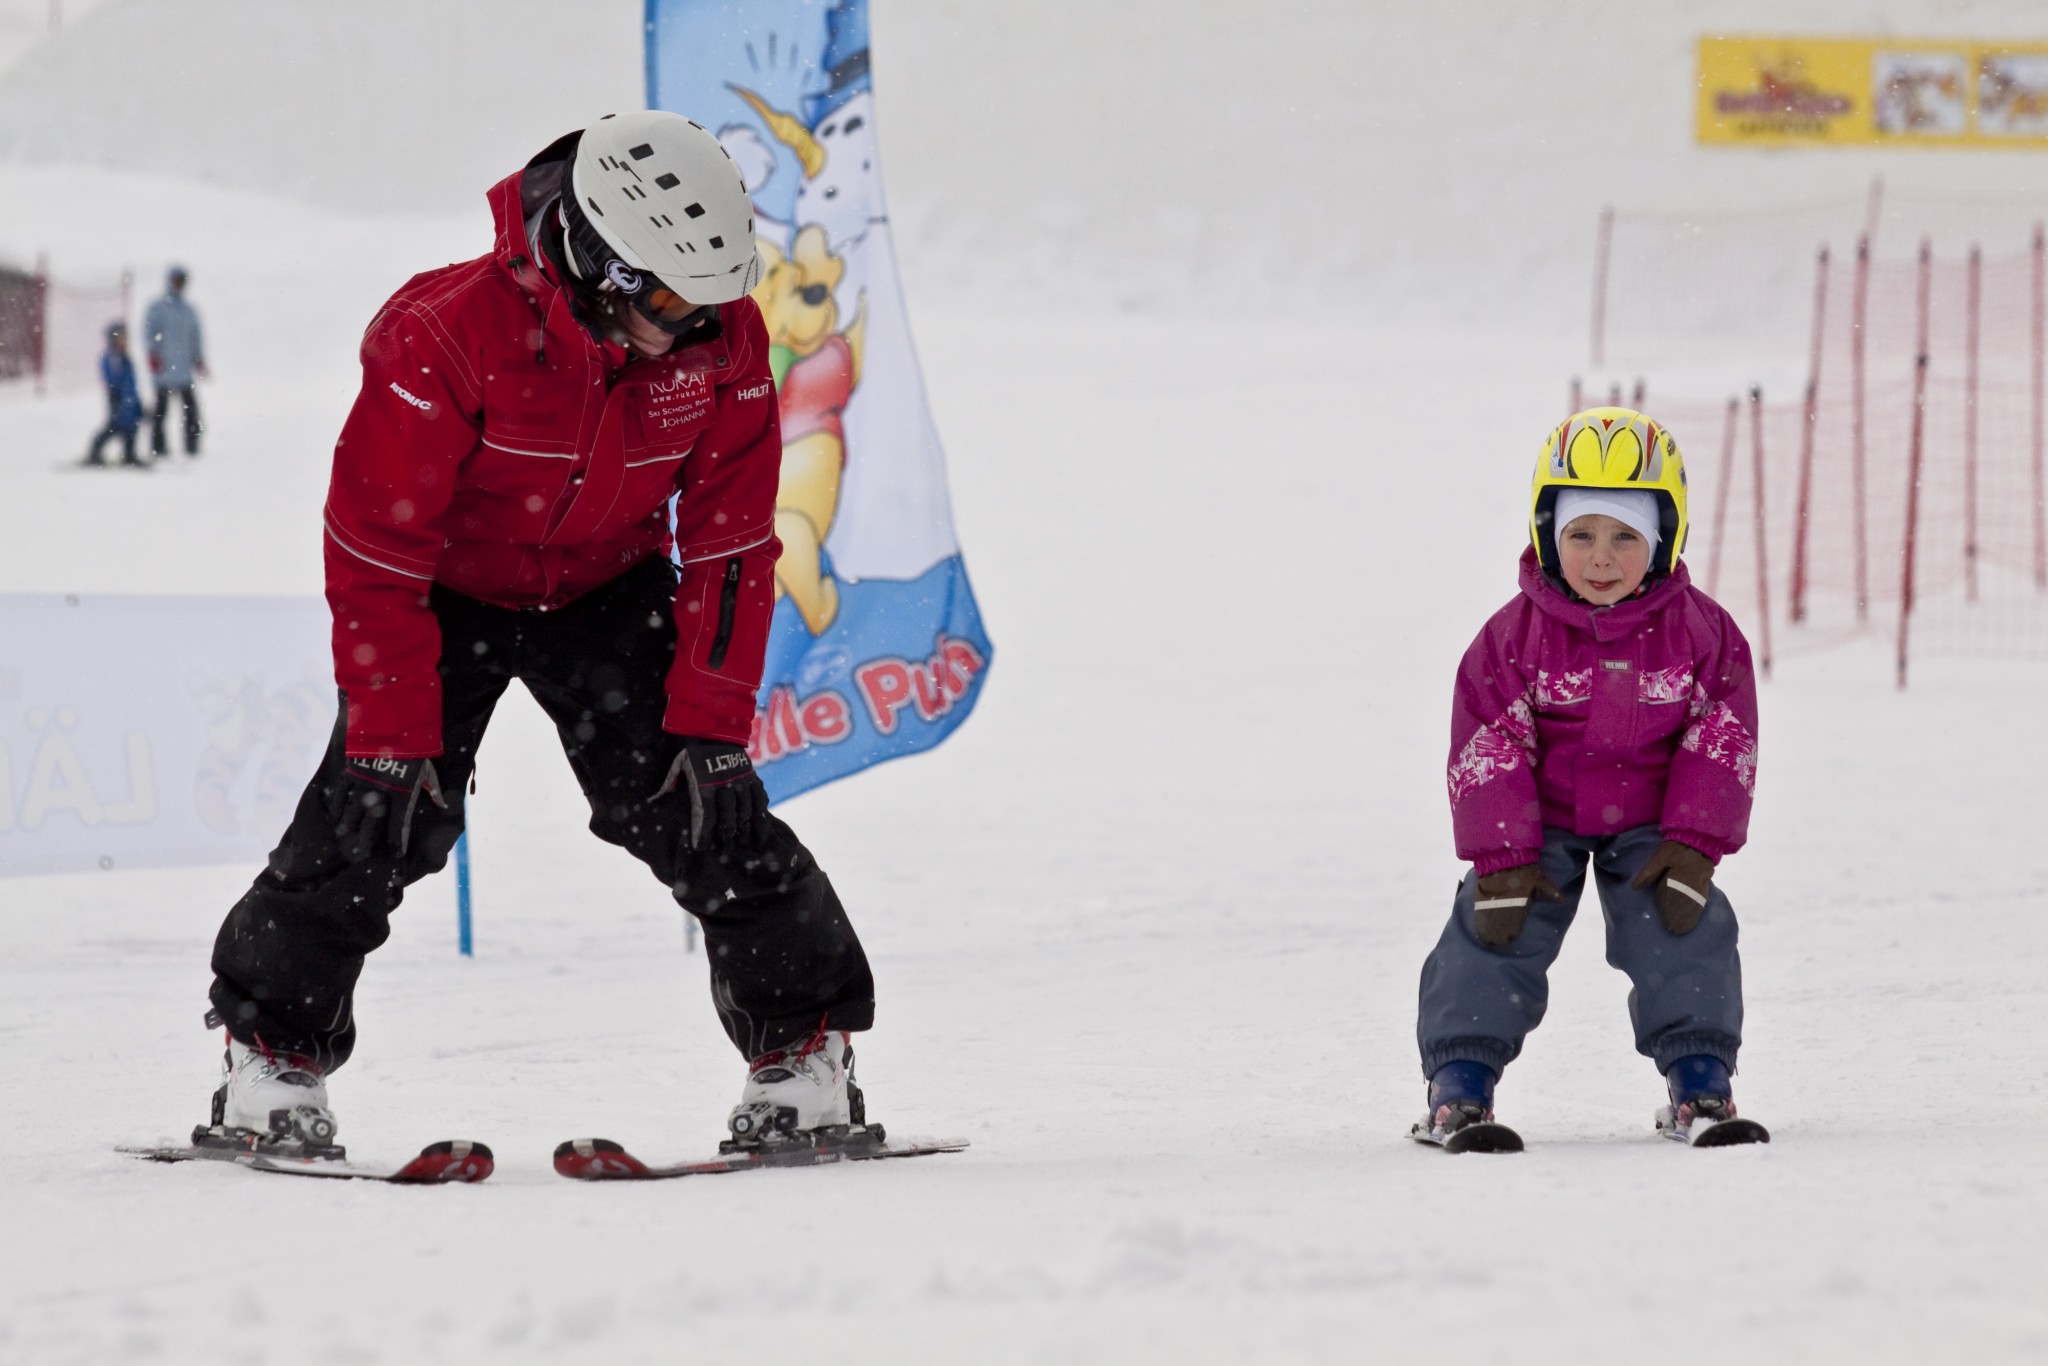 The Best Ski Resorts For Families